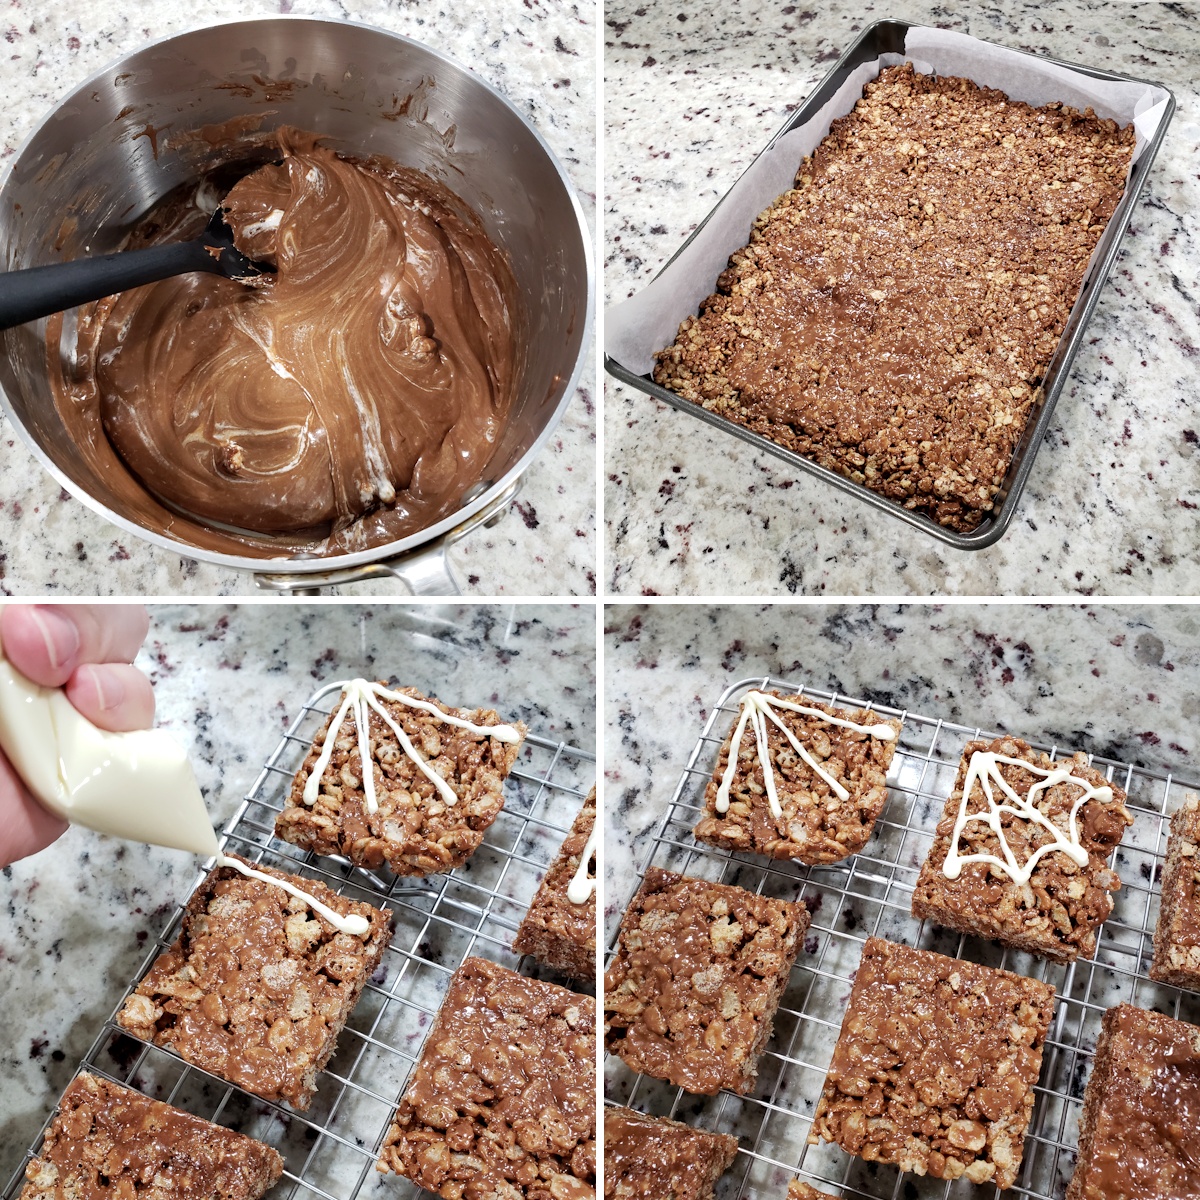 Pressing rice krispies treats into a pan and decorating with white chocolate.